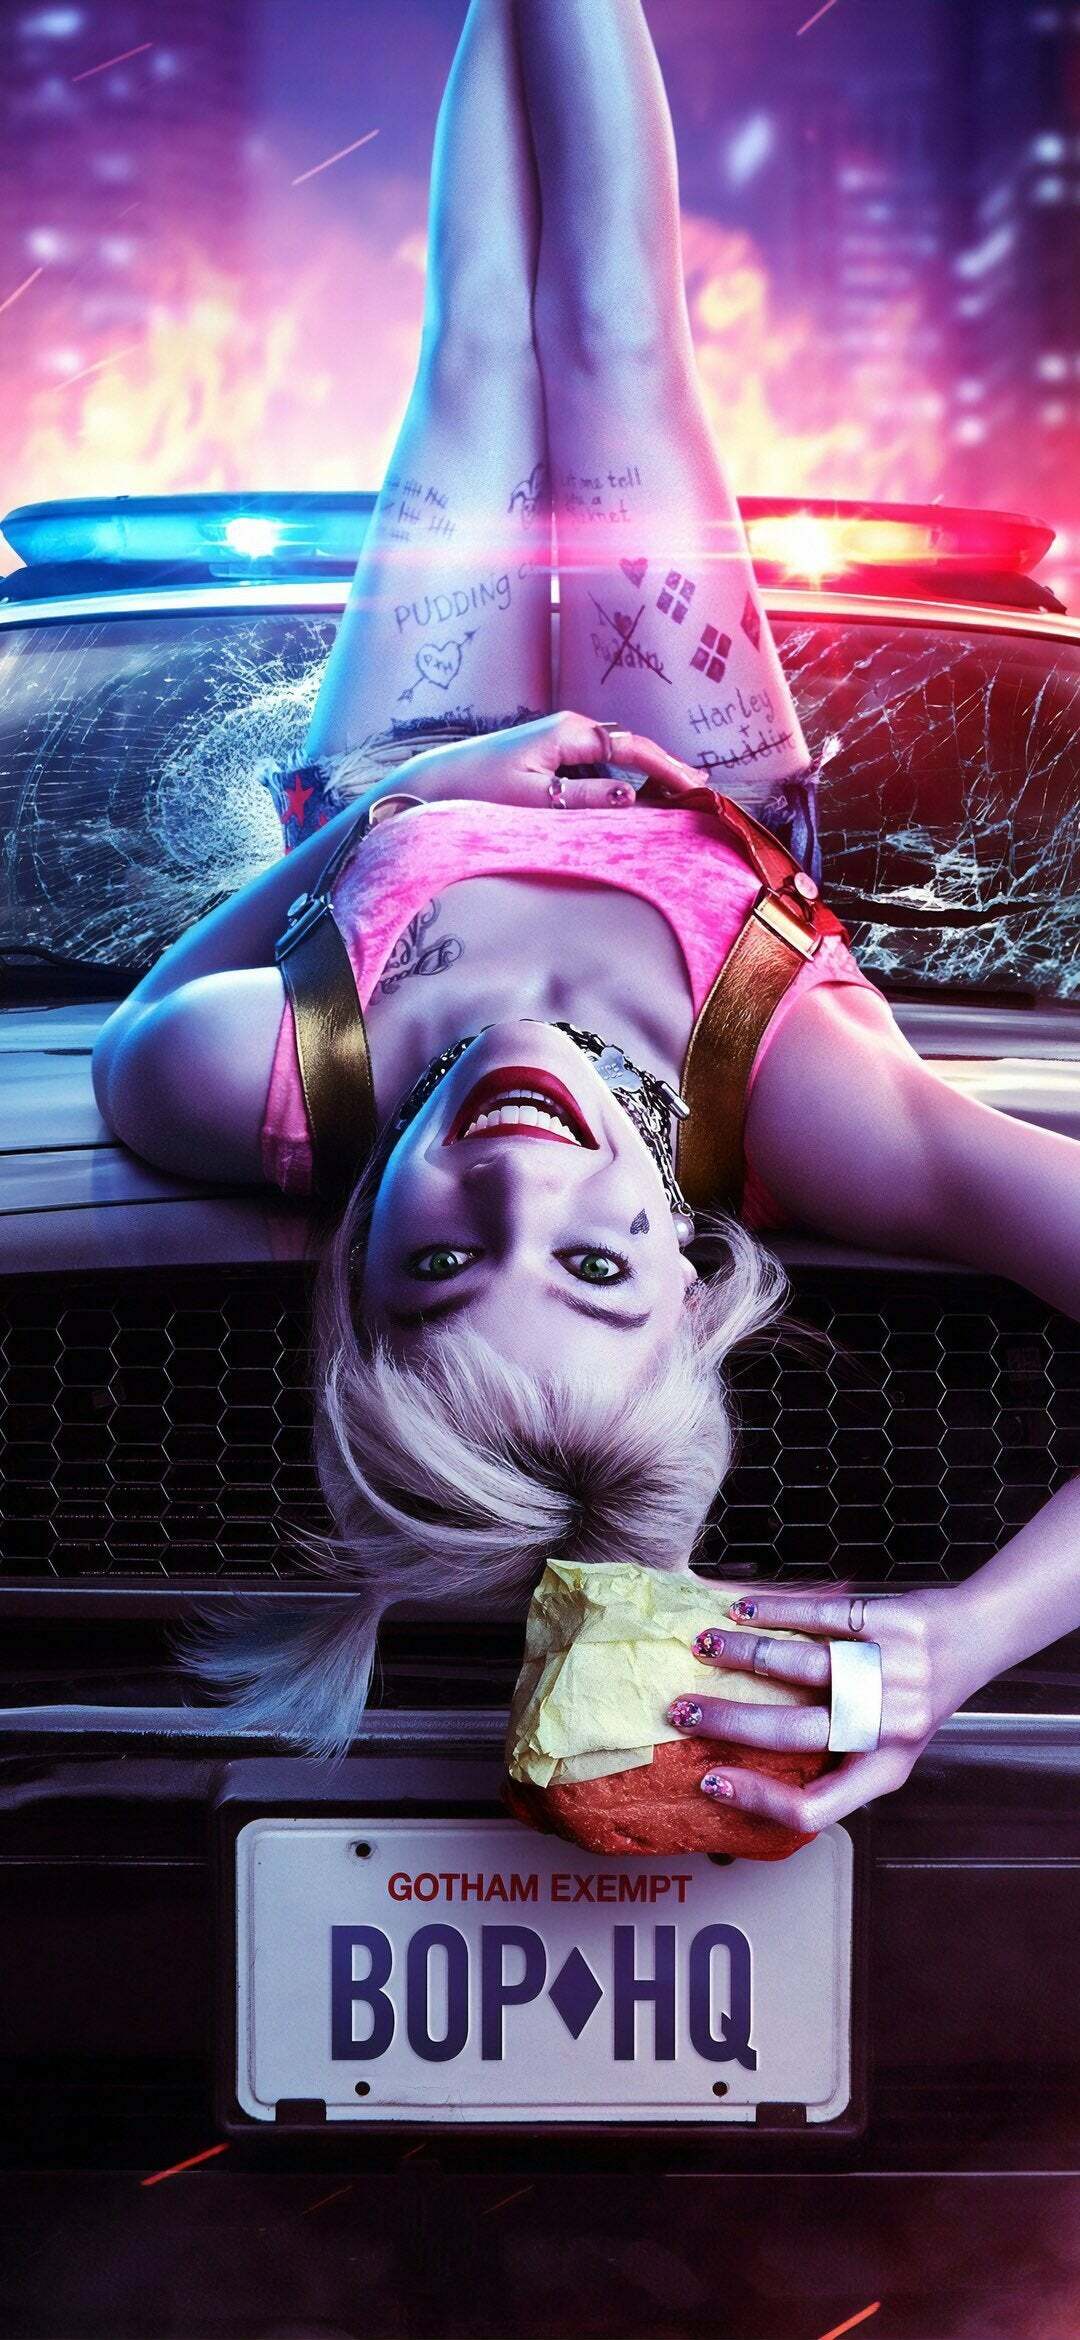 I would throatfuck Margot Robbies throat when she is upside